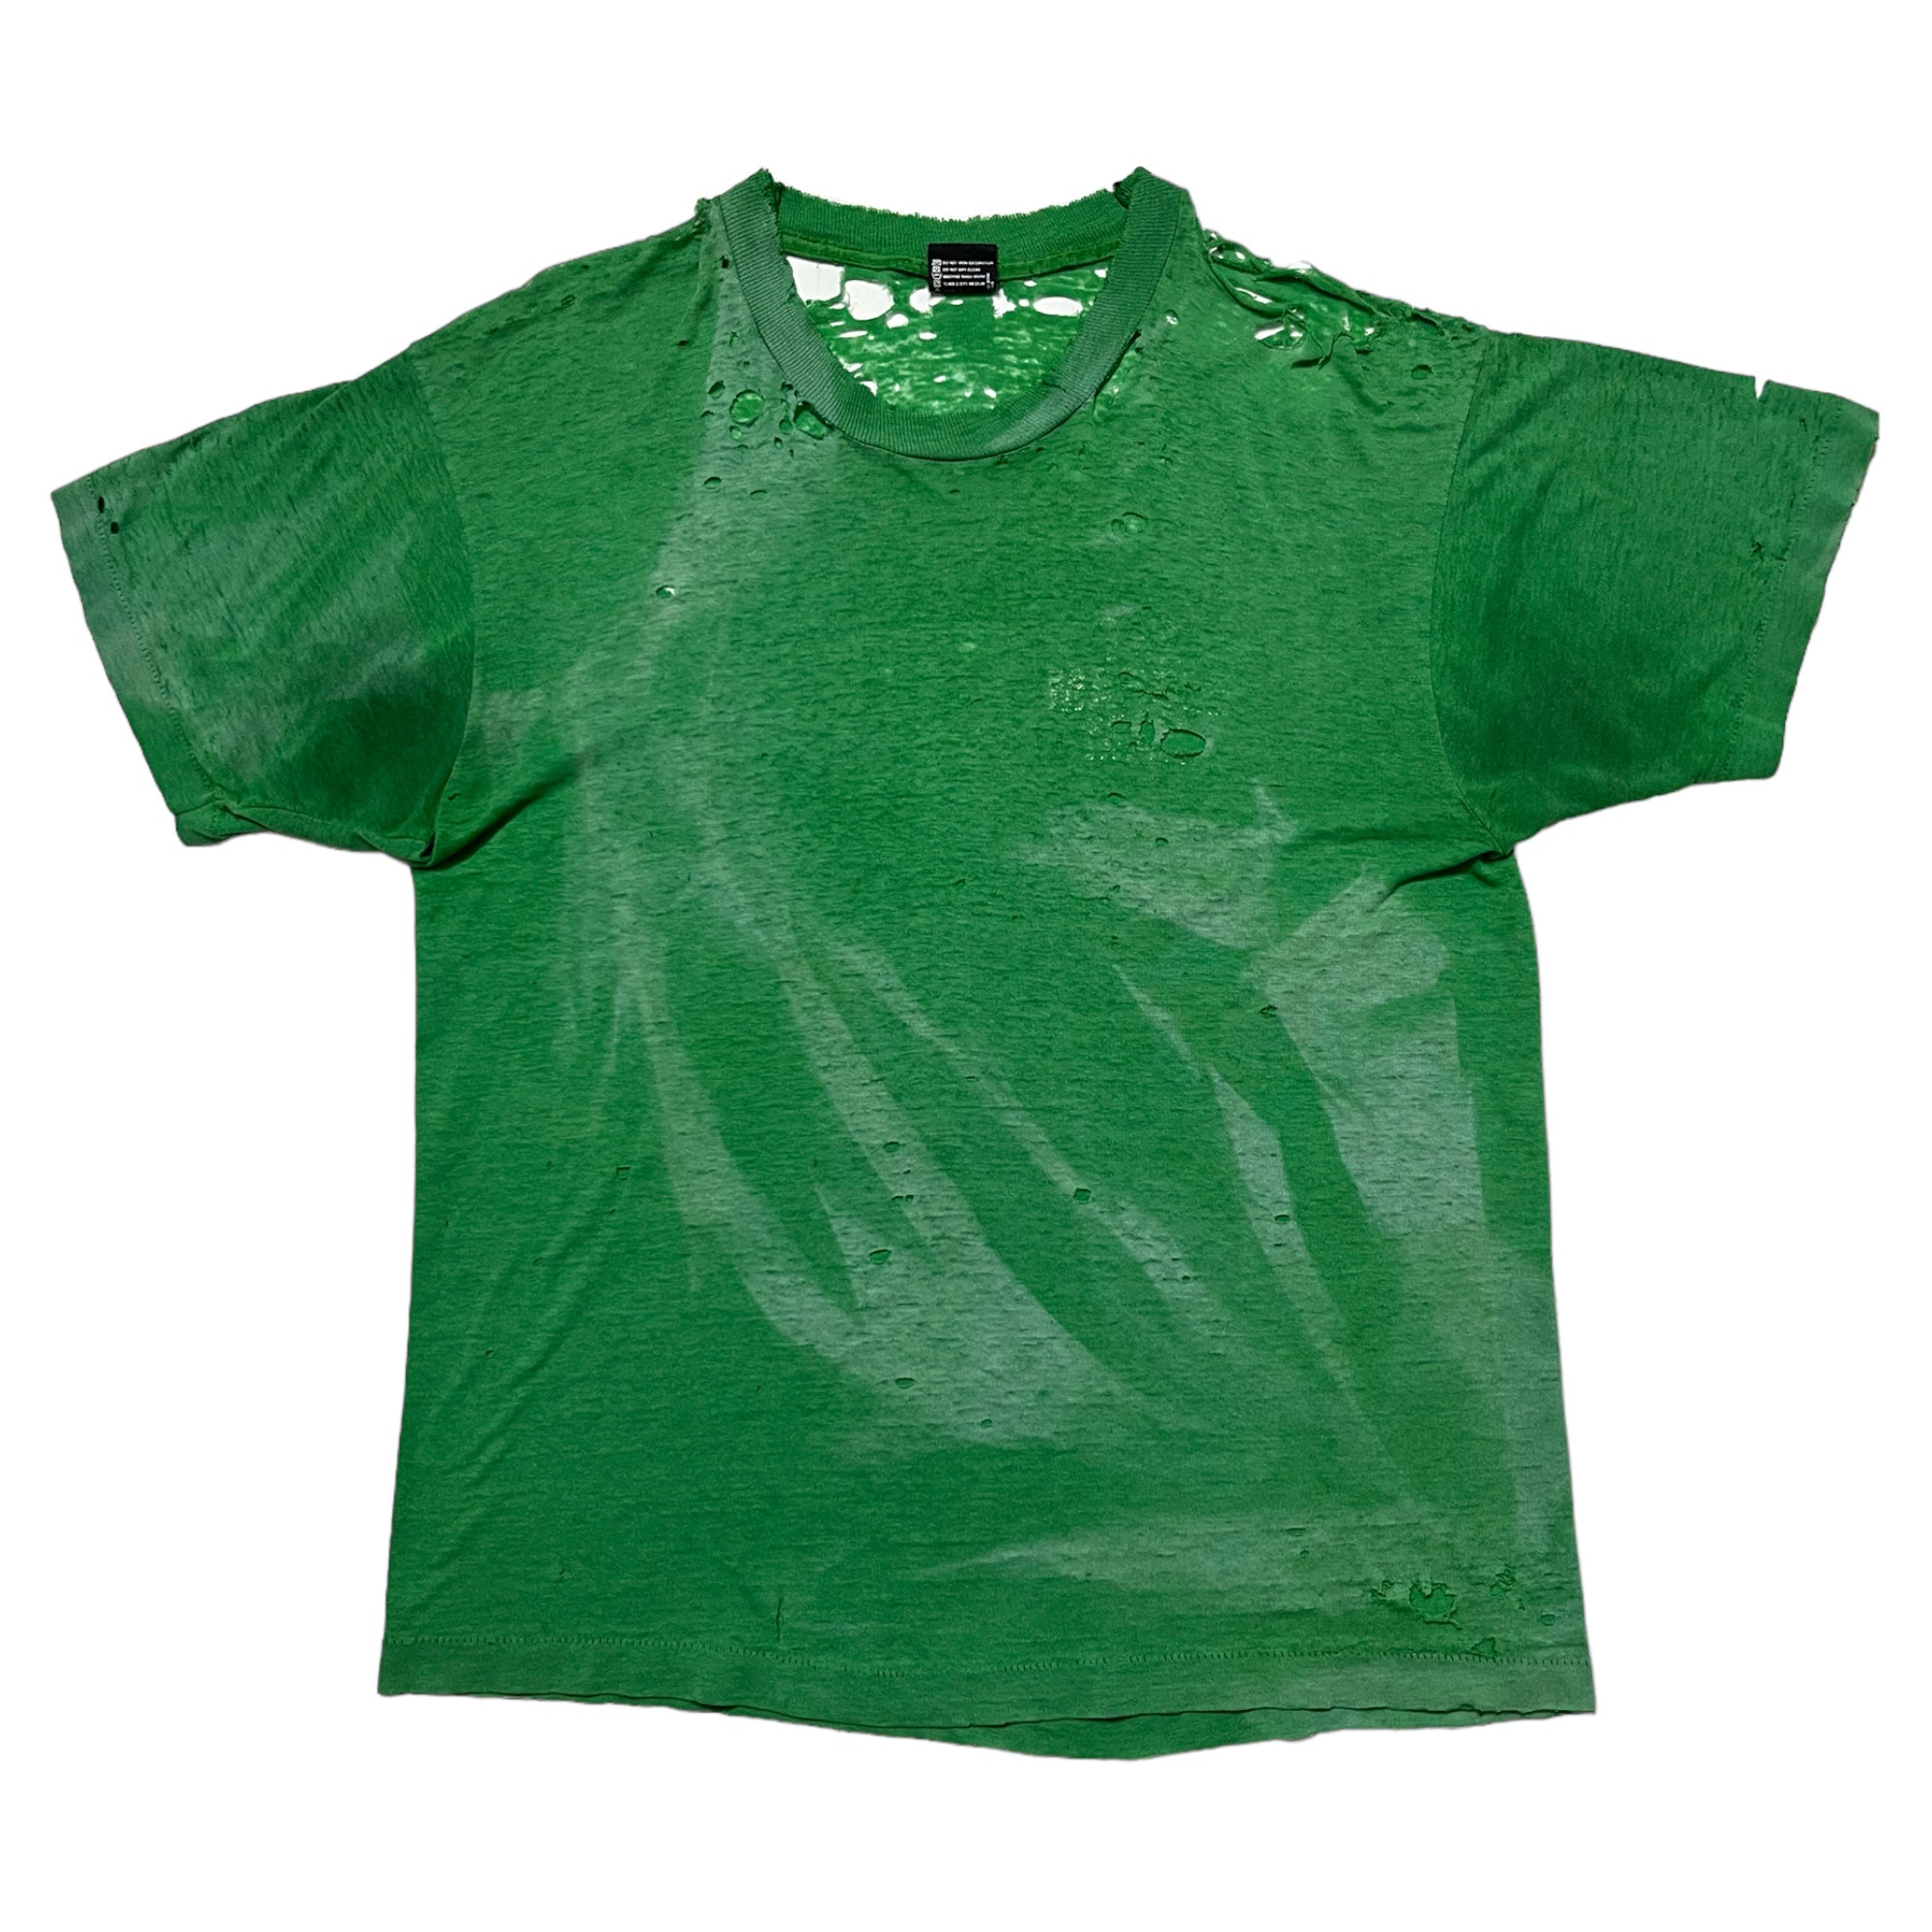 Thrashed & Sun Drenched ‘Architectural Marble’ T-Shirt - Faded Kelly Green - L/XL